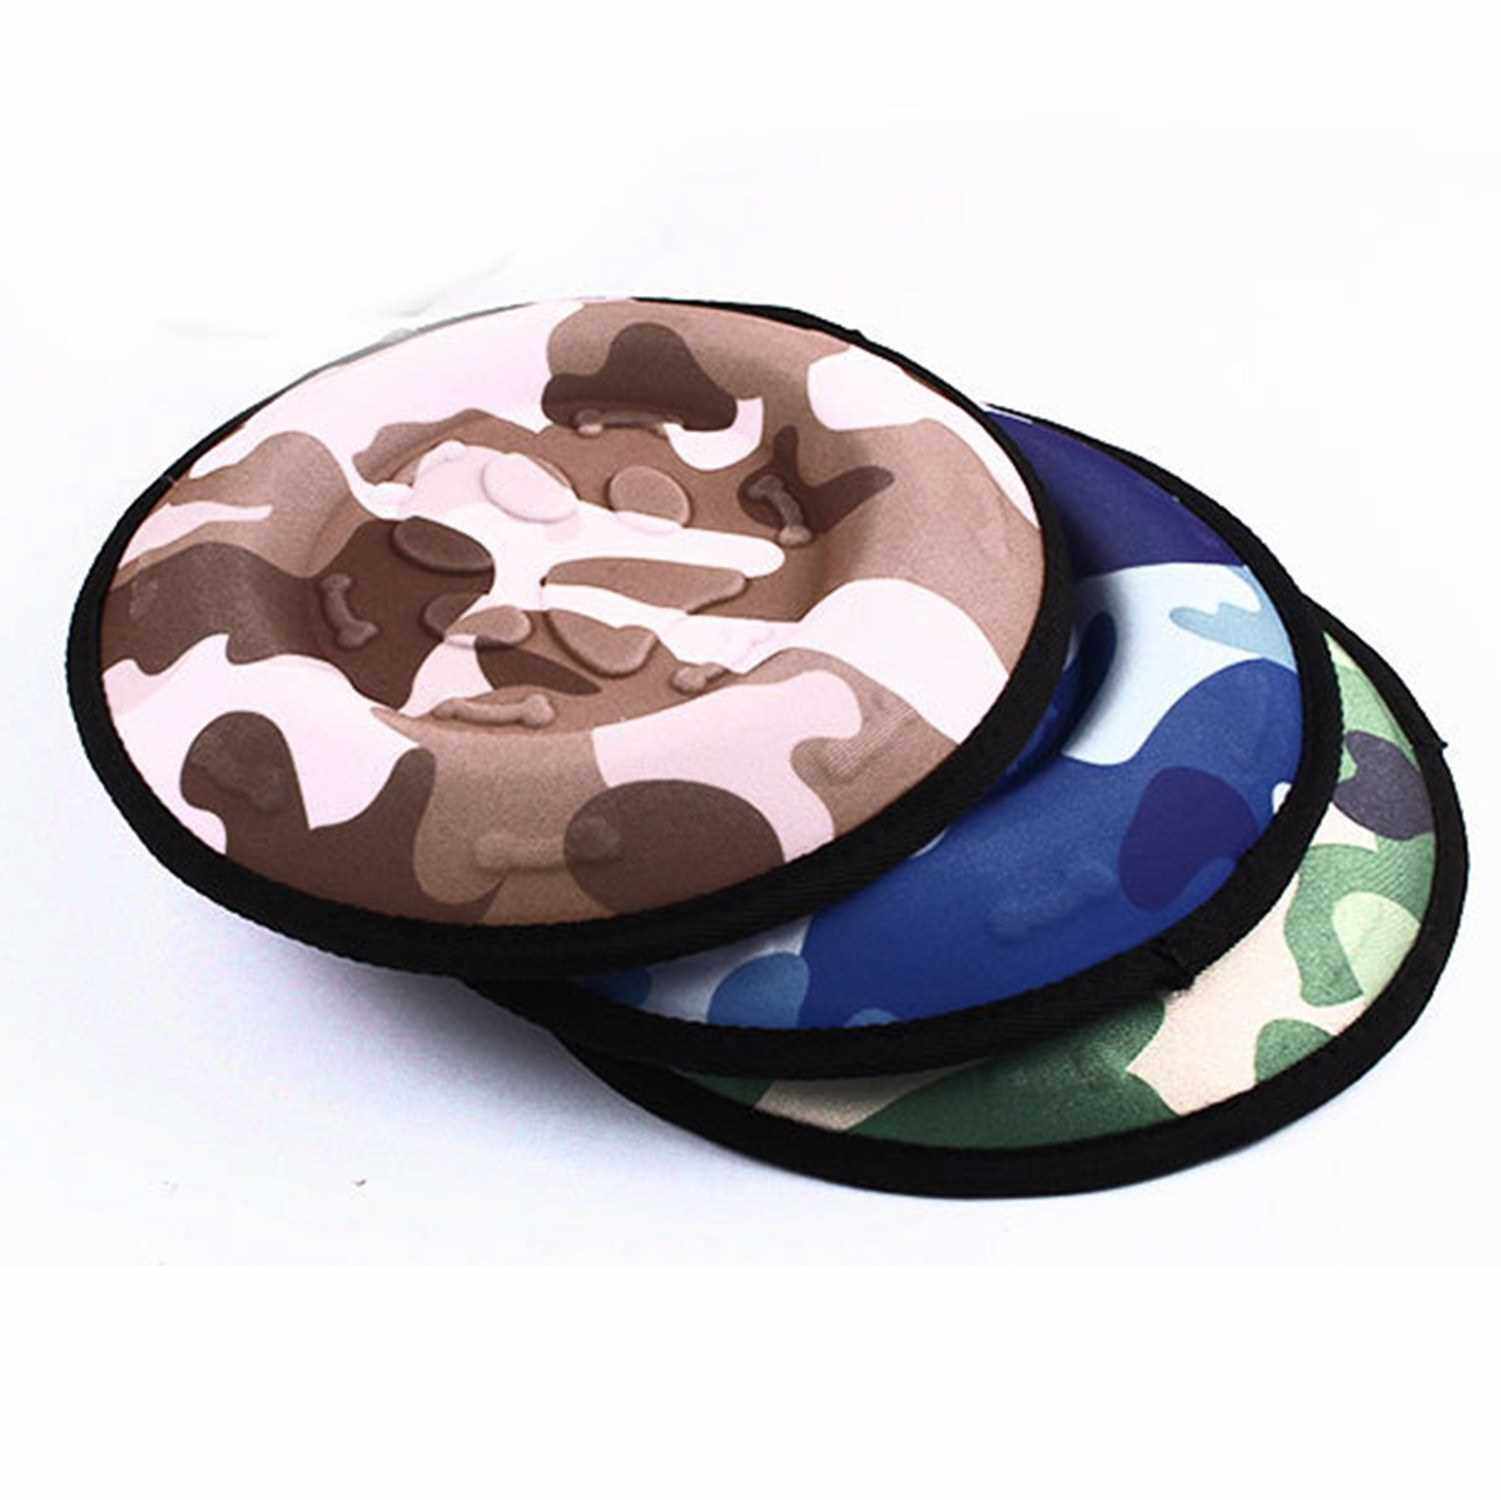 Dog Toy Interactive Flying Disc Floatable Disc for Pets Playing Training Exercise Entertain Tools Dog Cat Funny Toy (Brown)